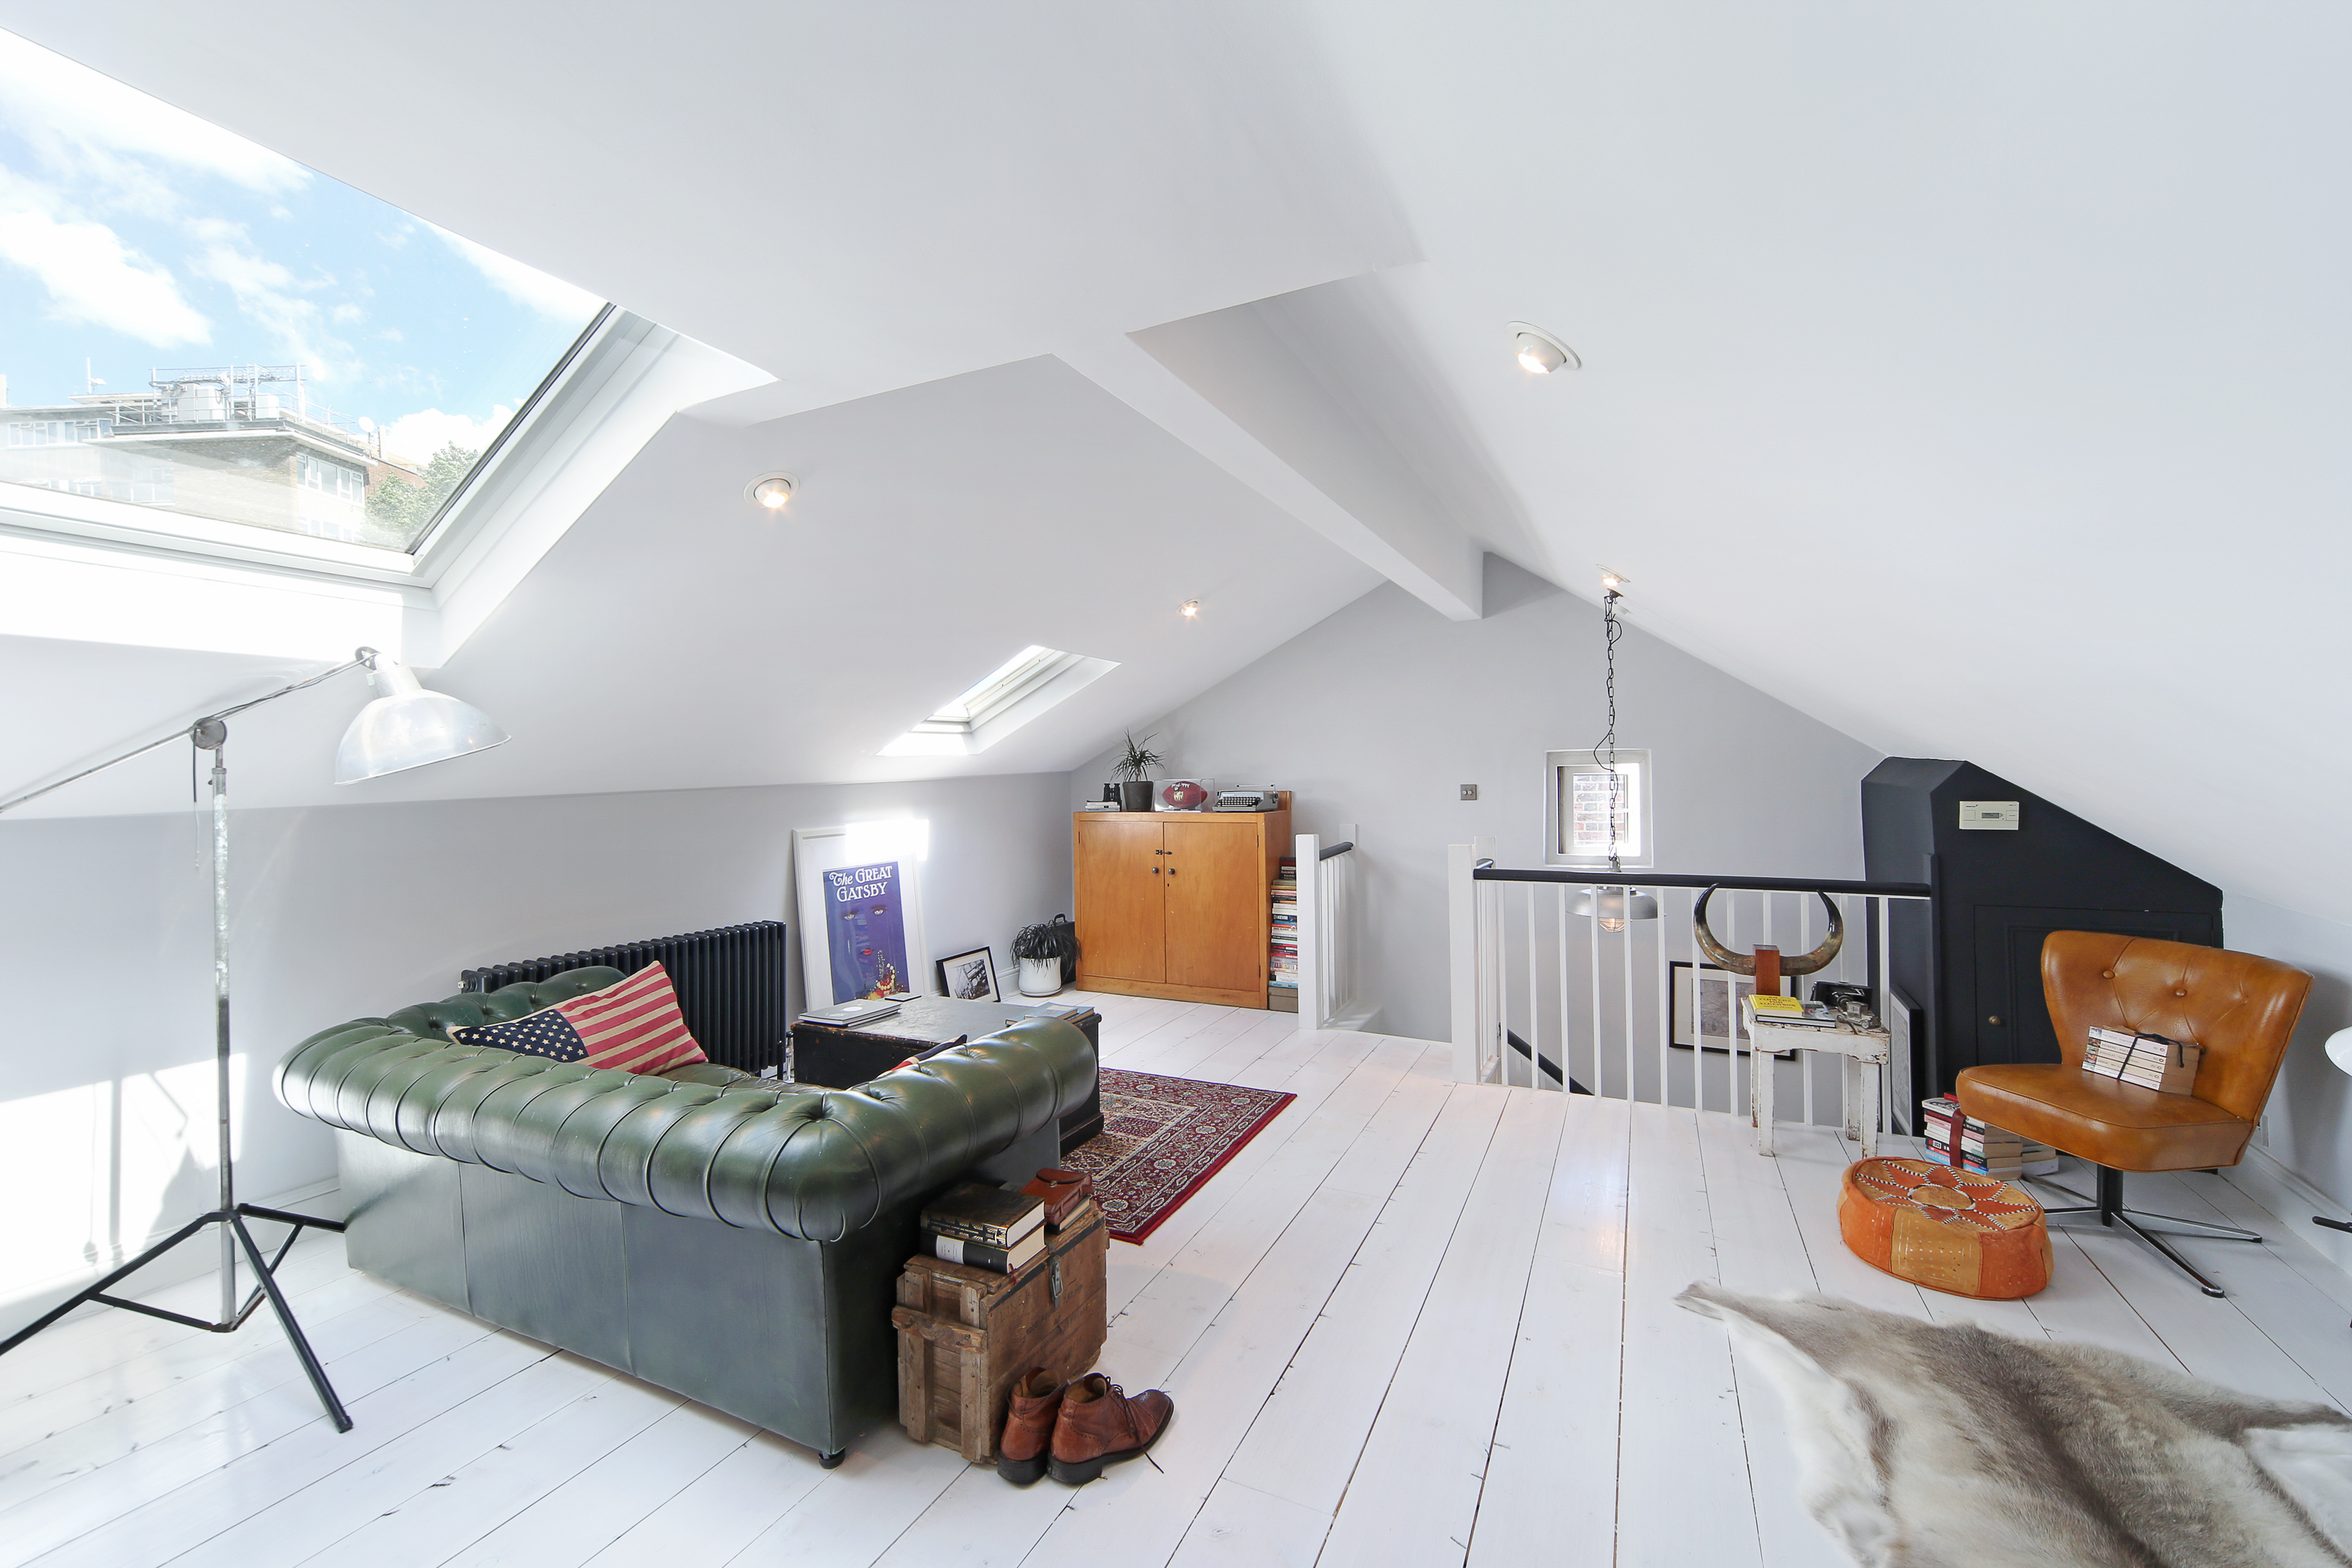 </p> <p>Find your ideal home design pro on designfor-me.com - get matched and see who's interested in your home project. Click image to see more inspiration from our design pros</p> <p>Design by Stephen, Interior designer from Hackney, London</p> <p> #interiordesign #interiors #homedecor #homeinspiration #scandihome #scandidecor #scandinaviandesign #loftextensions #loftextensiondesign </p> <p>